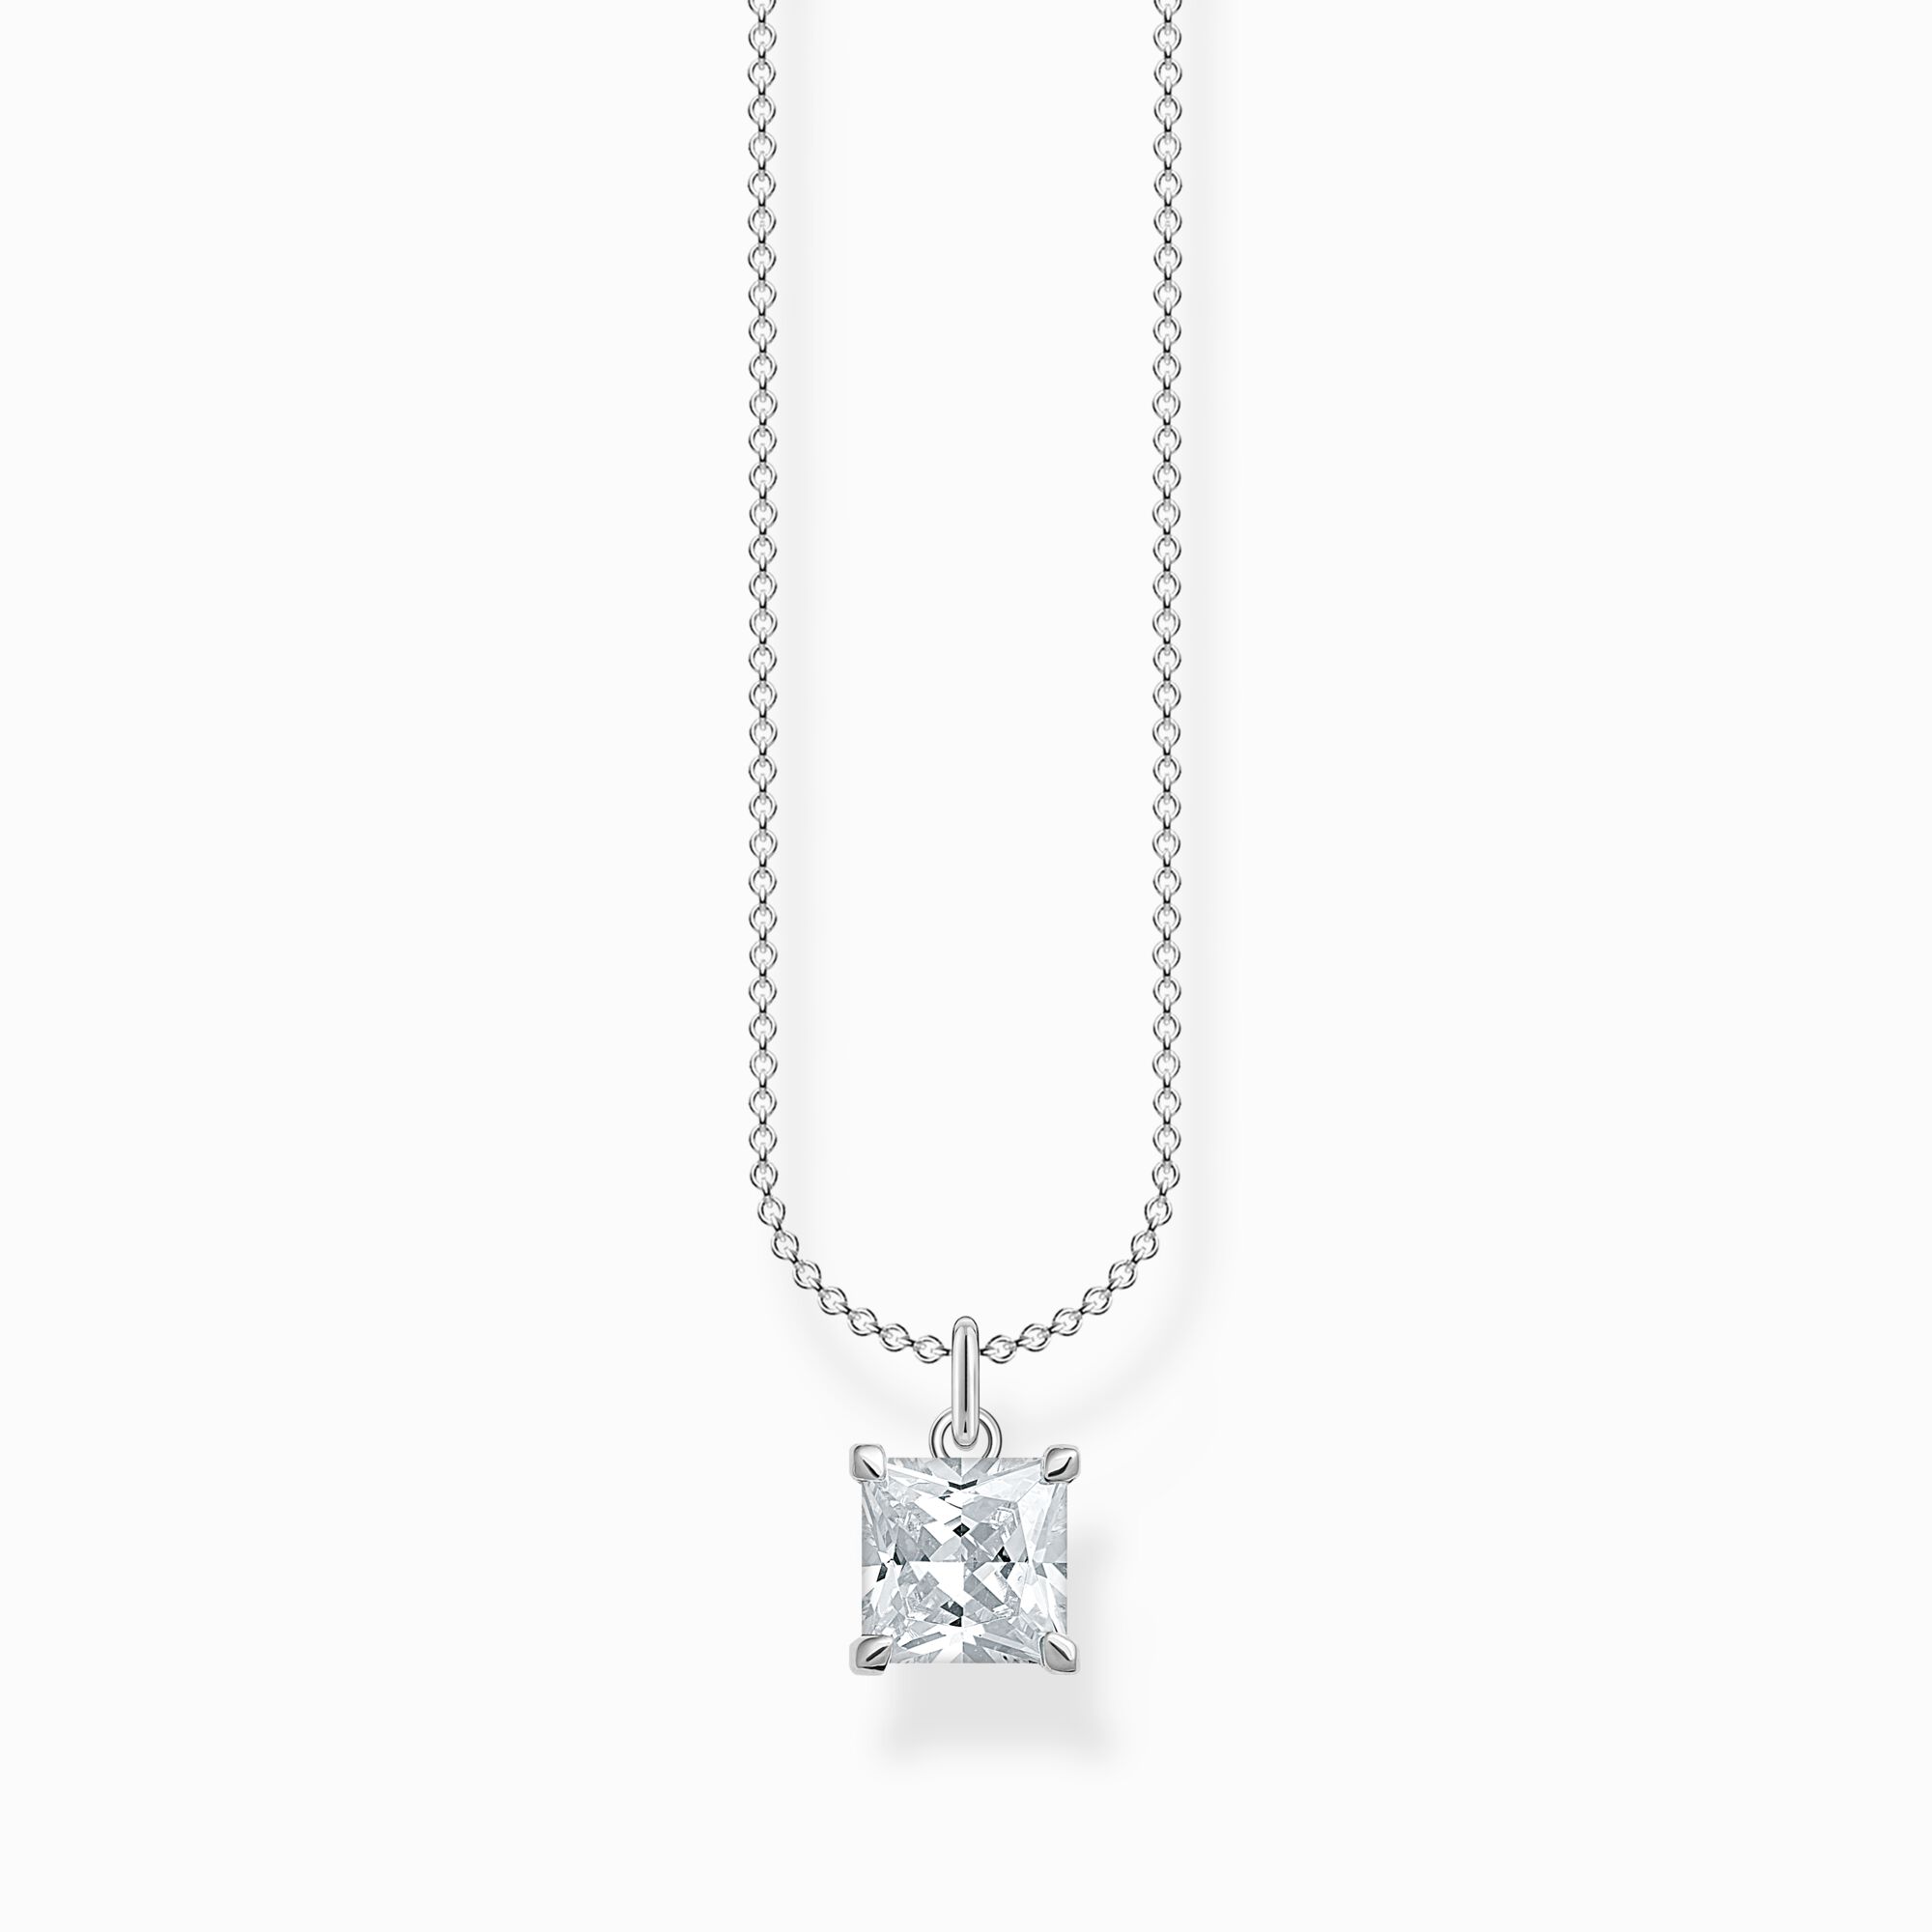 Necklace with white stone silver from the Charming Collection collection in the THOMAS SABO online store